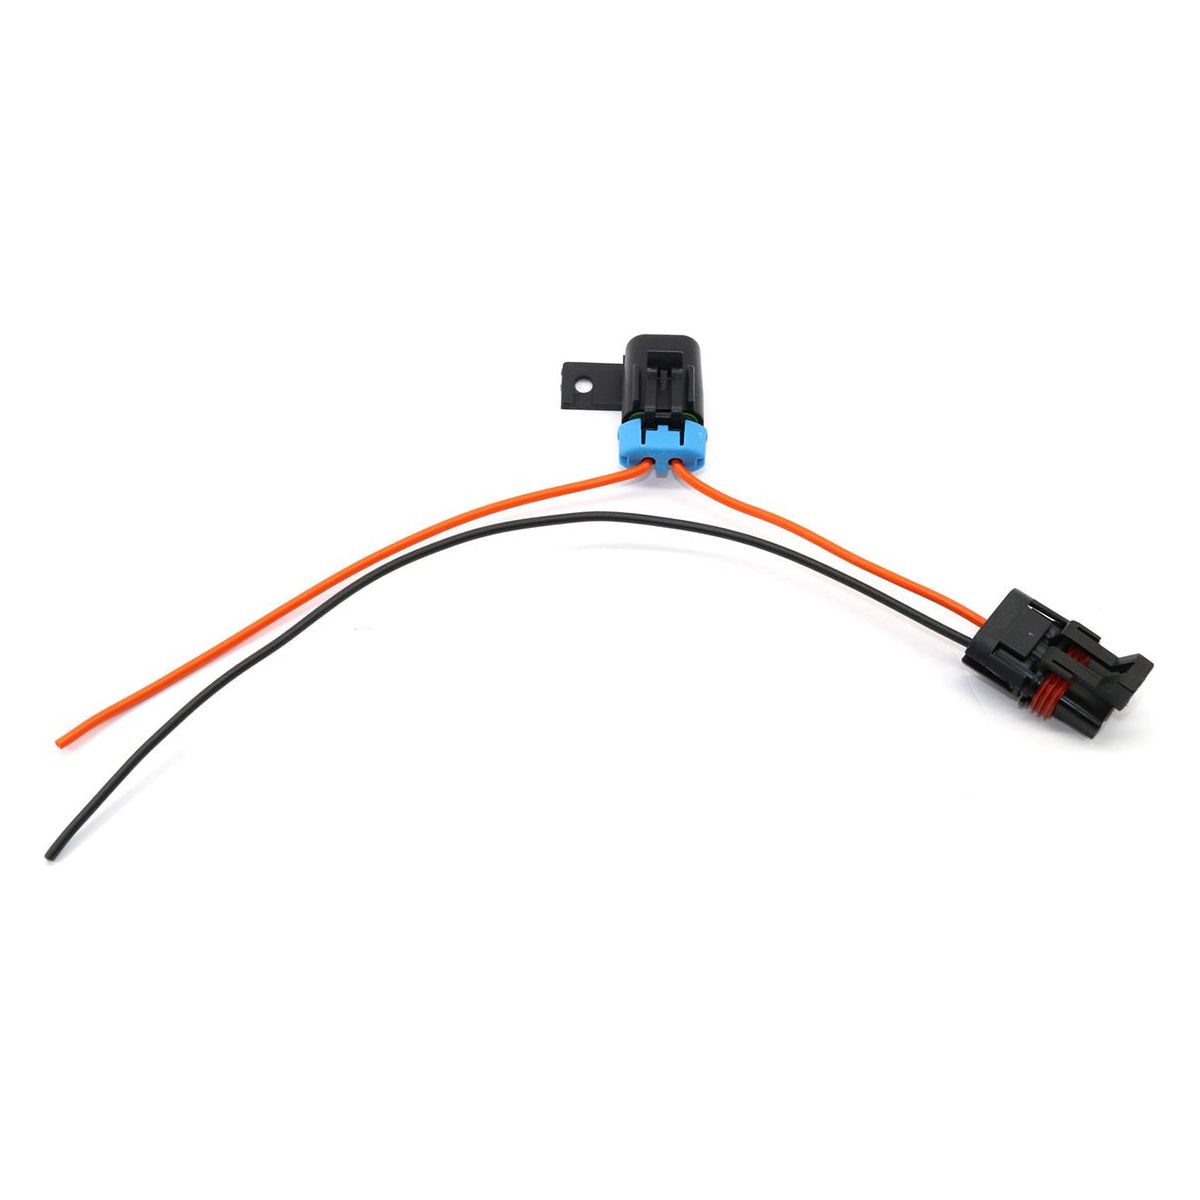 Polaris Pulse Busbar Accessory Wiring Harness with 14 Gauge Fused IGN/GND Wires | XTC Power Products